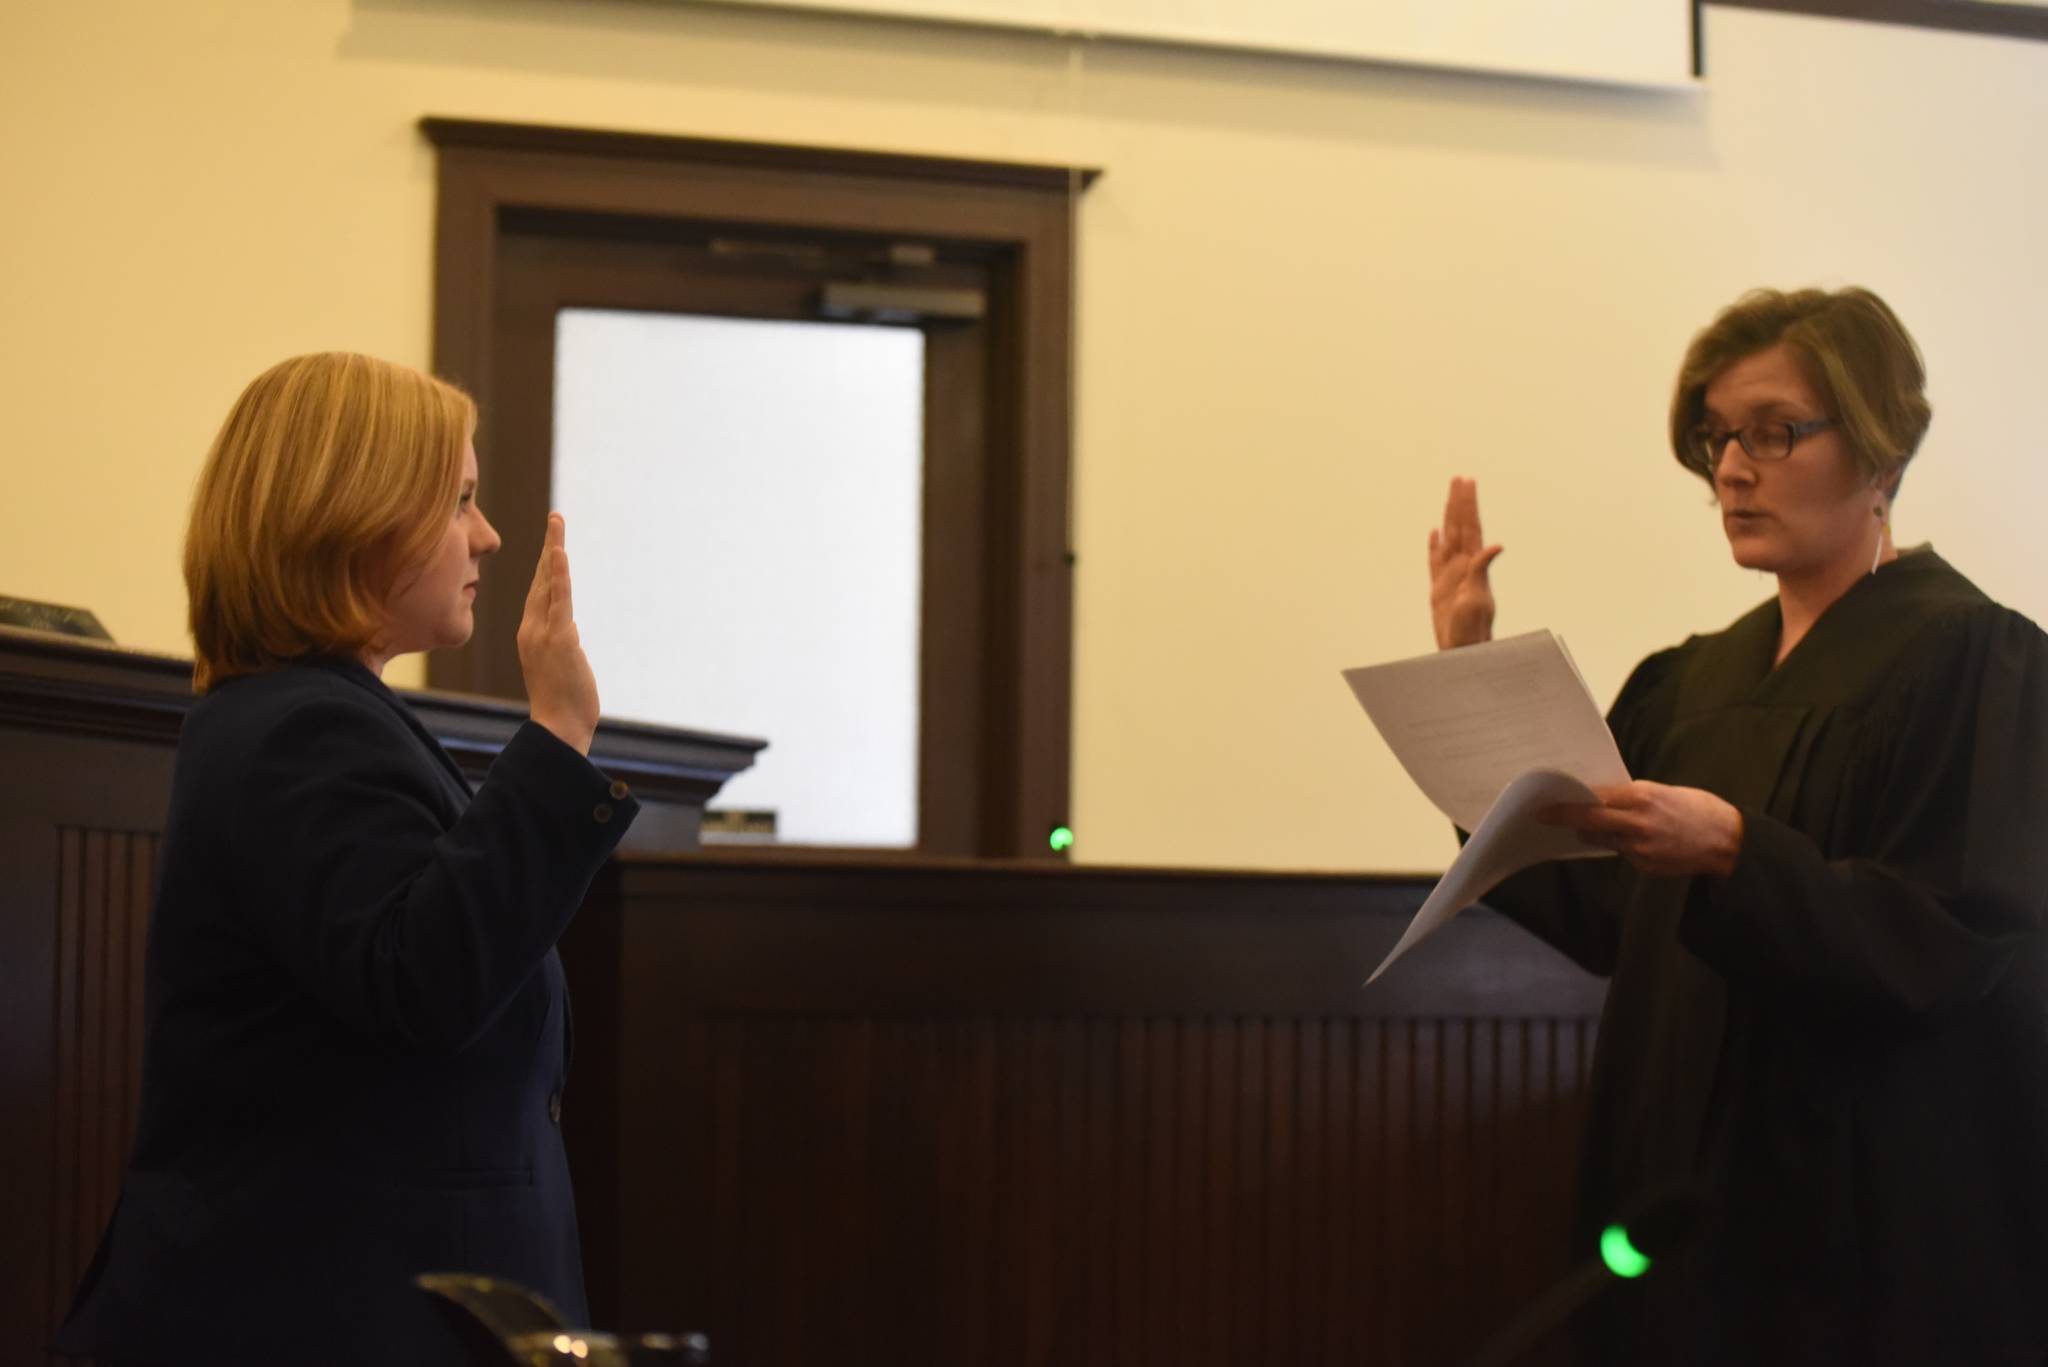 Staff photo/Tate Thomson                                Carolyn Jewett (left) being sworn-in by the Honorable Judge Kathryn C. Loring (right) on Jan. 11.